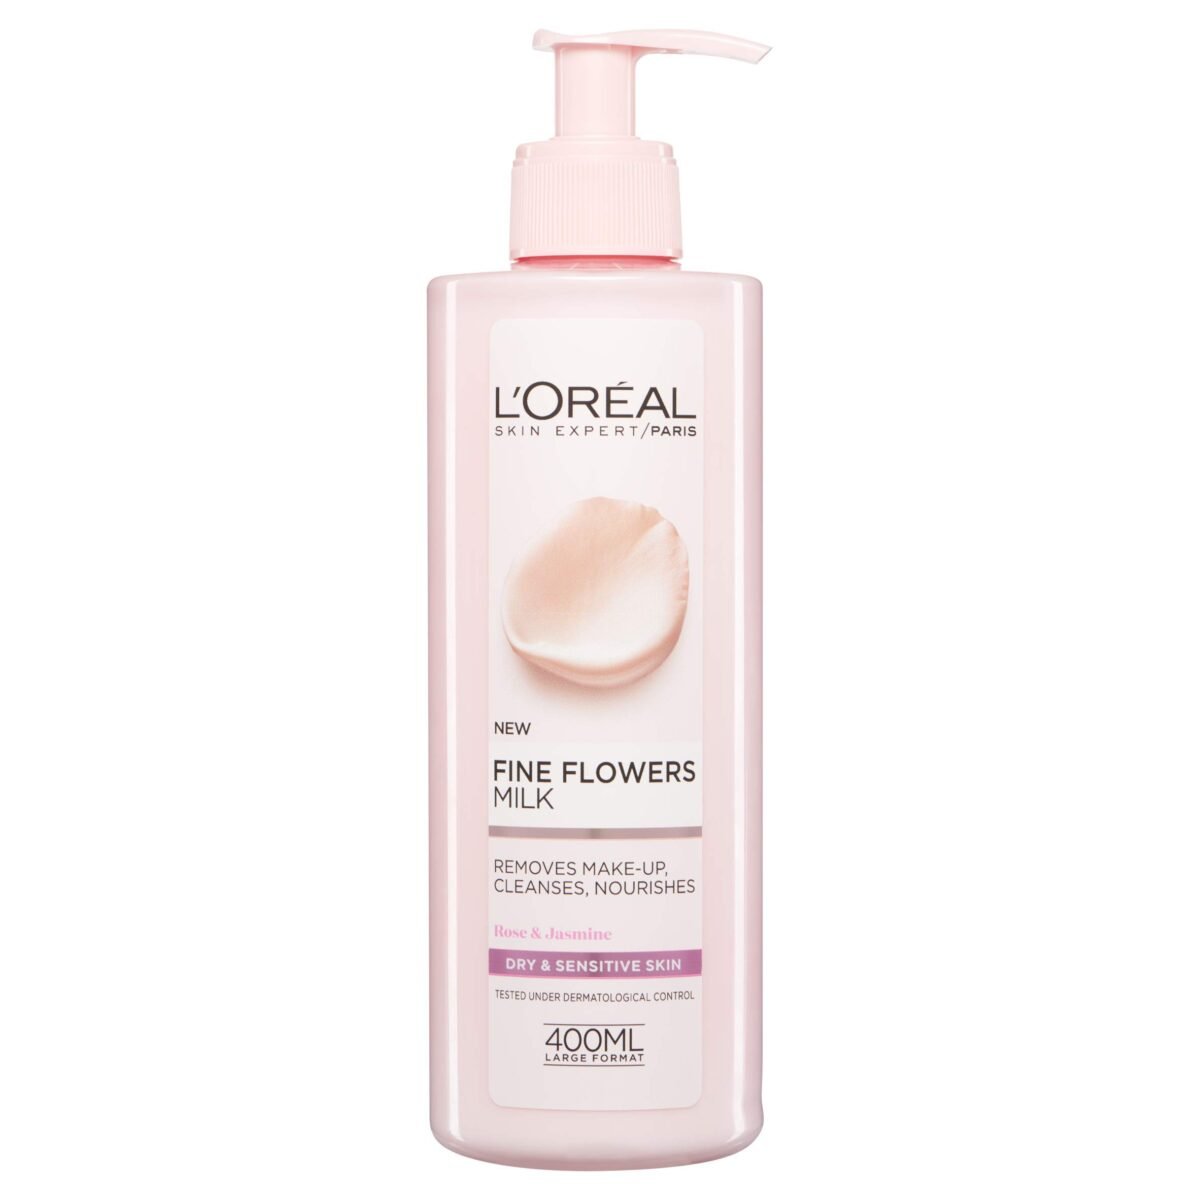 L'Oreal Fine Flowers Milk Makeup Remover Cleanser 400ml